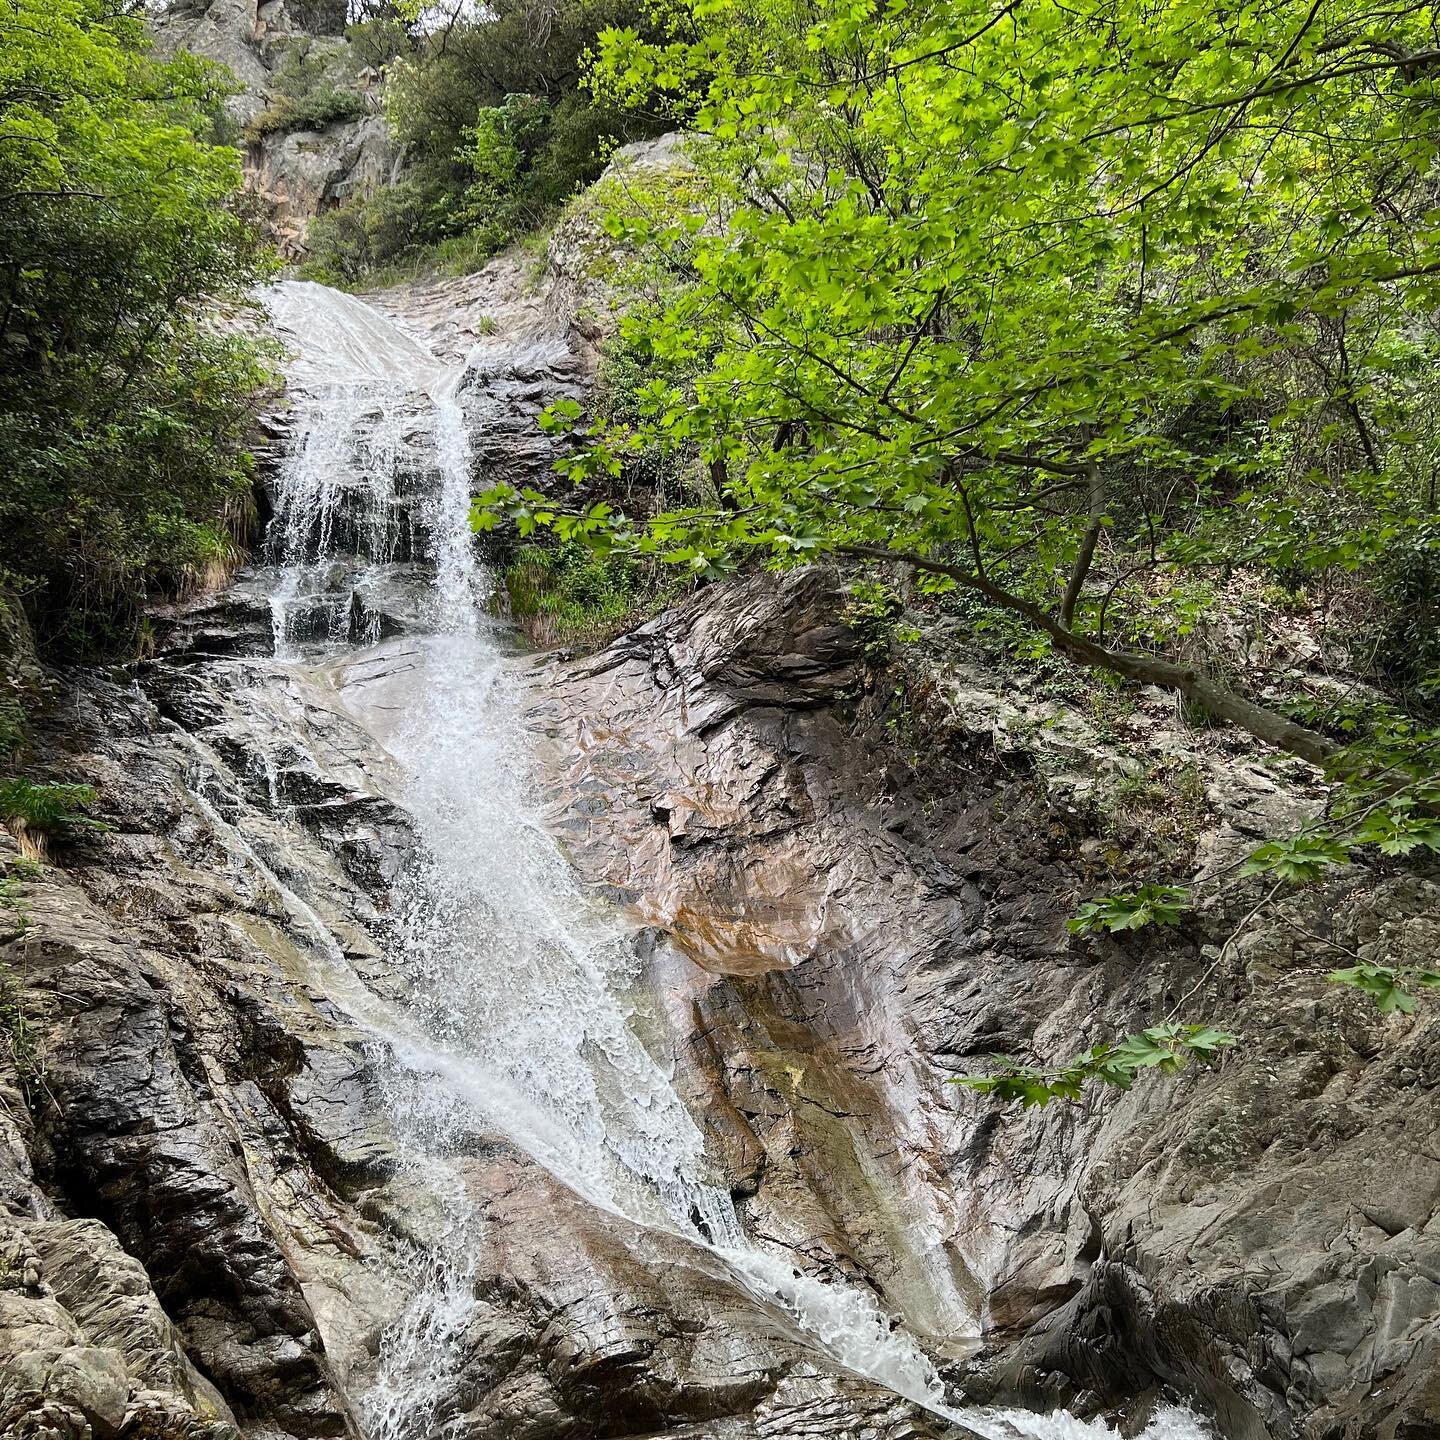 &bull; One from our last visit to the waterfall with Experiences 🌳

📍For bookings link in bio!
.
.
.

.
#agramada #agramadaexperiences #getaway #forestlovers #canyon #waterfall #slowliving #bestvacations #chalkidiki #glampinglife #uniquehotels #coz